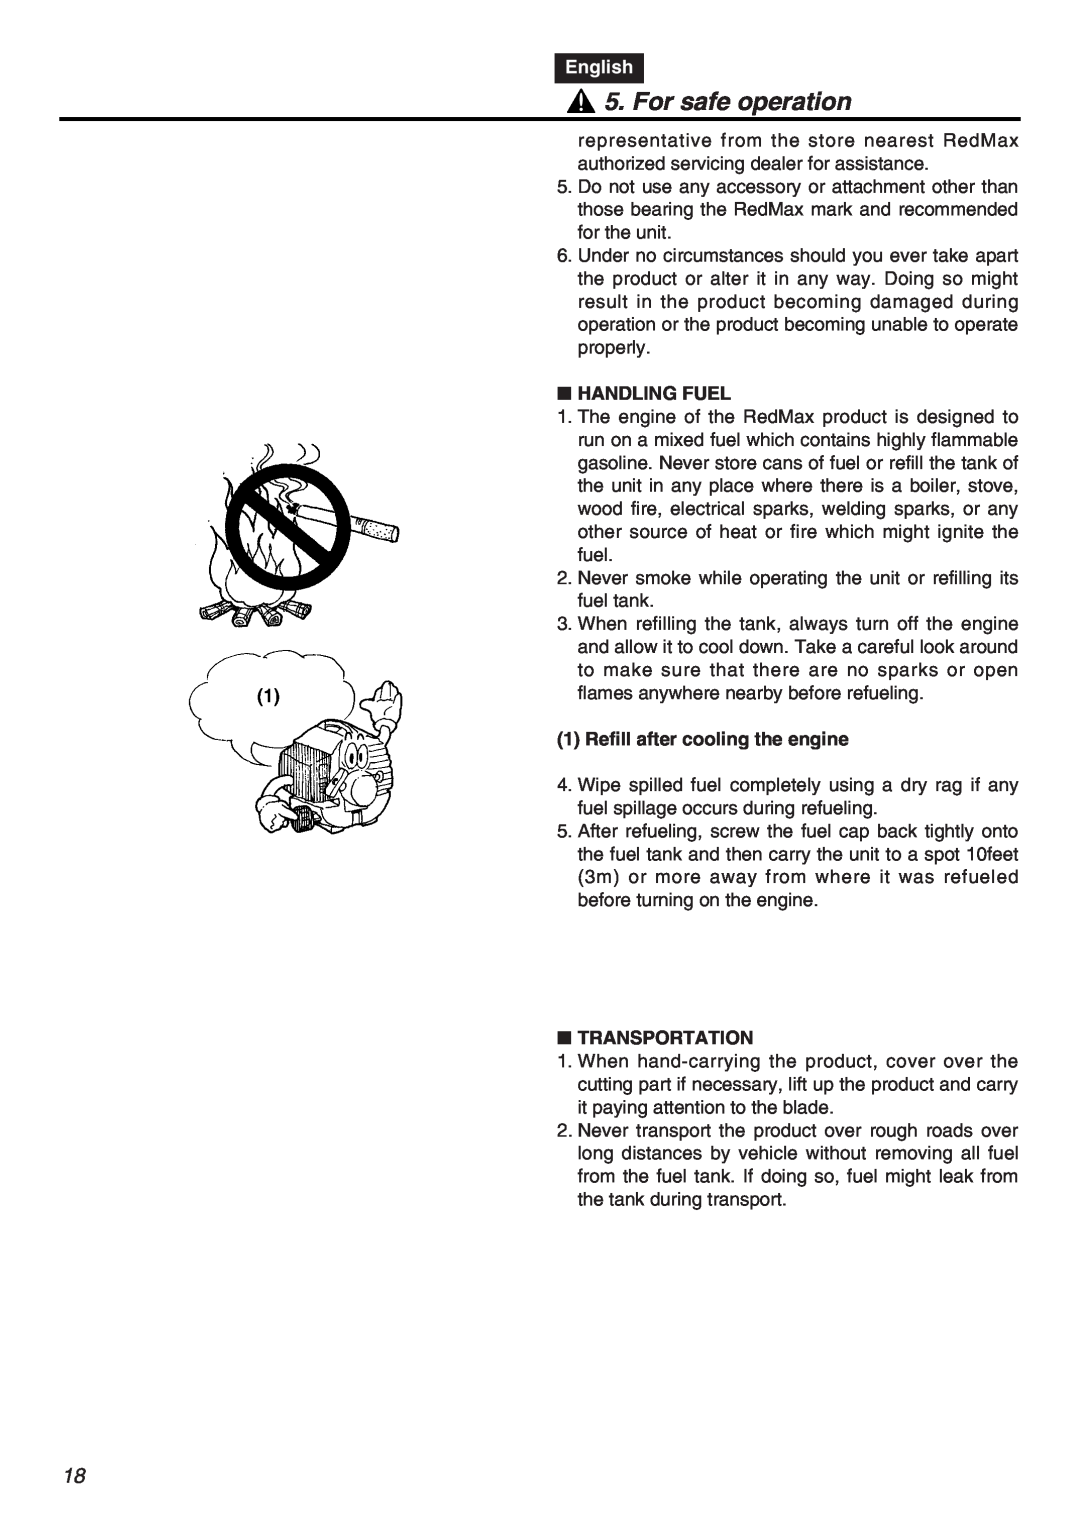 RedMax EXZ2401S-PH-CA manual For safe operation, English, Handling Fuel, Refill after cooling the engine, Transportation 